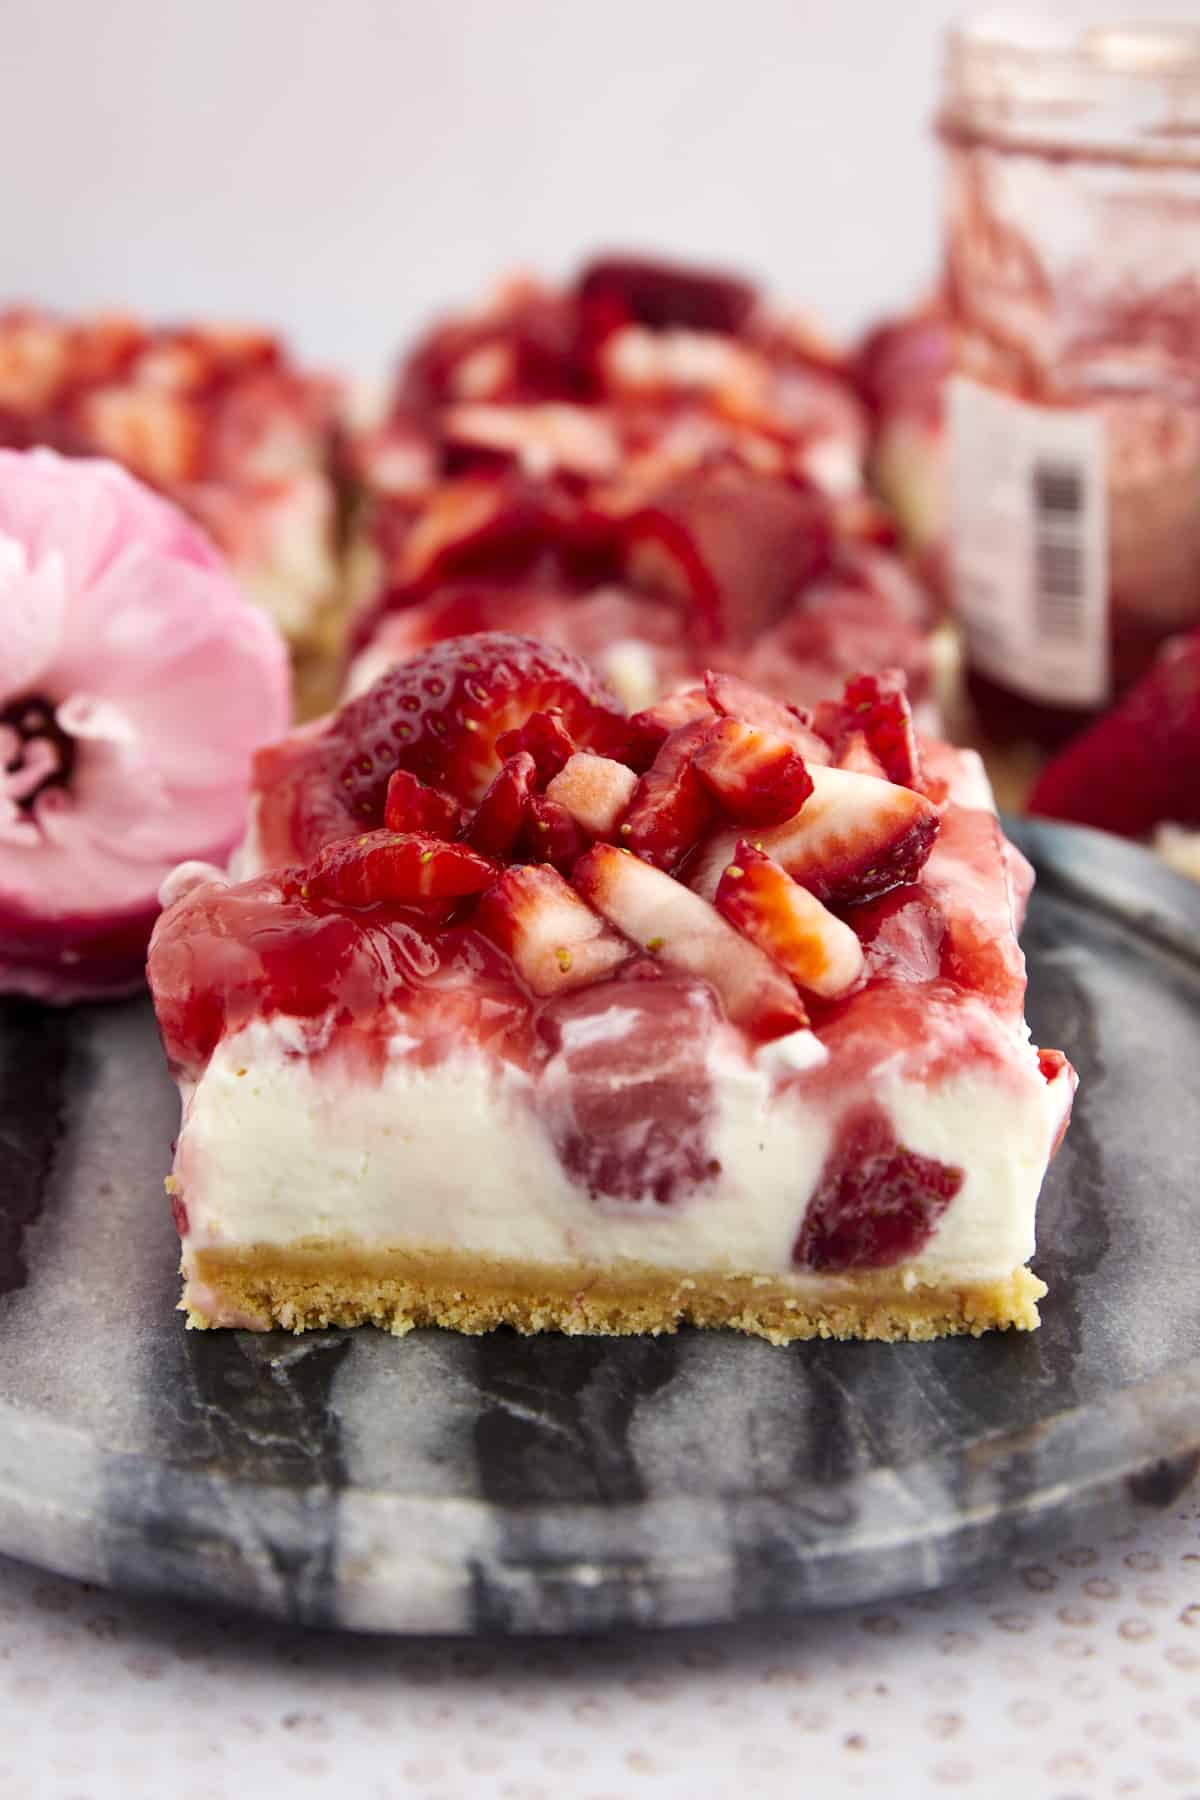 A side view of a strawberry cheesecake bar.